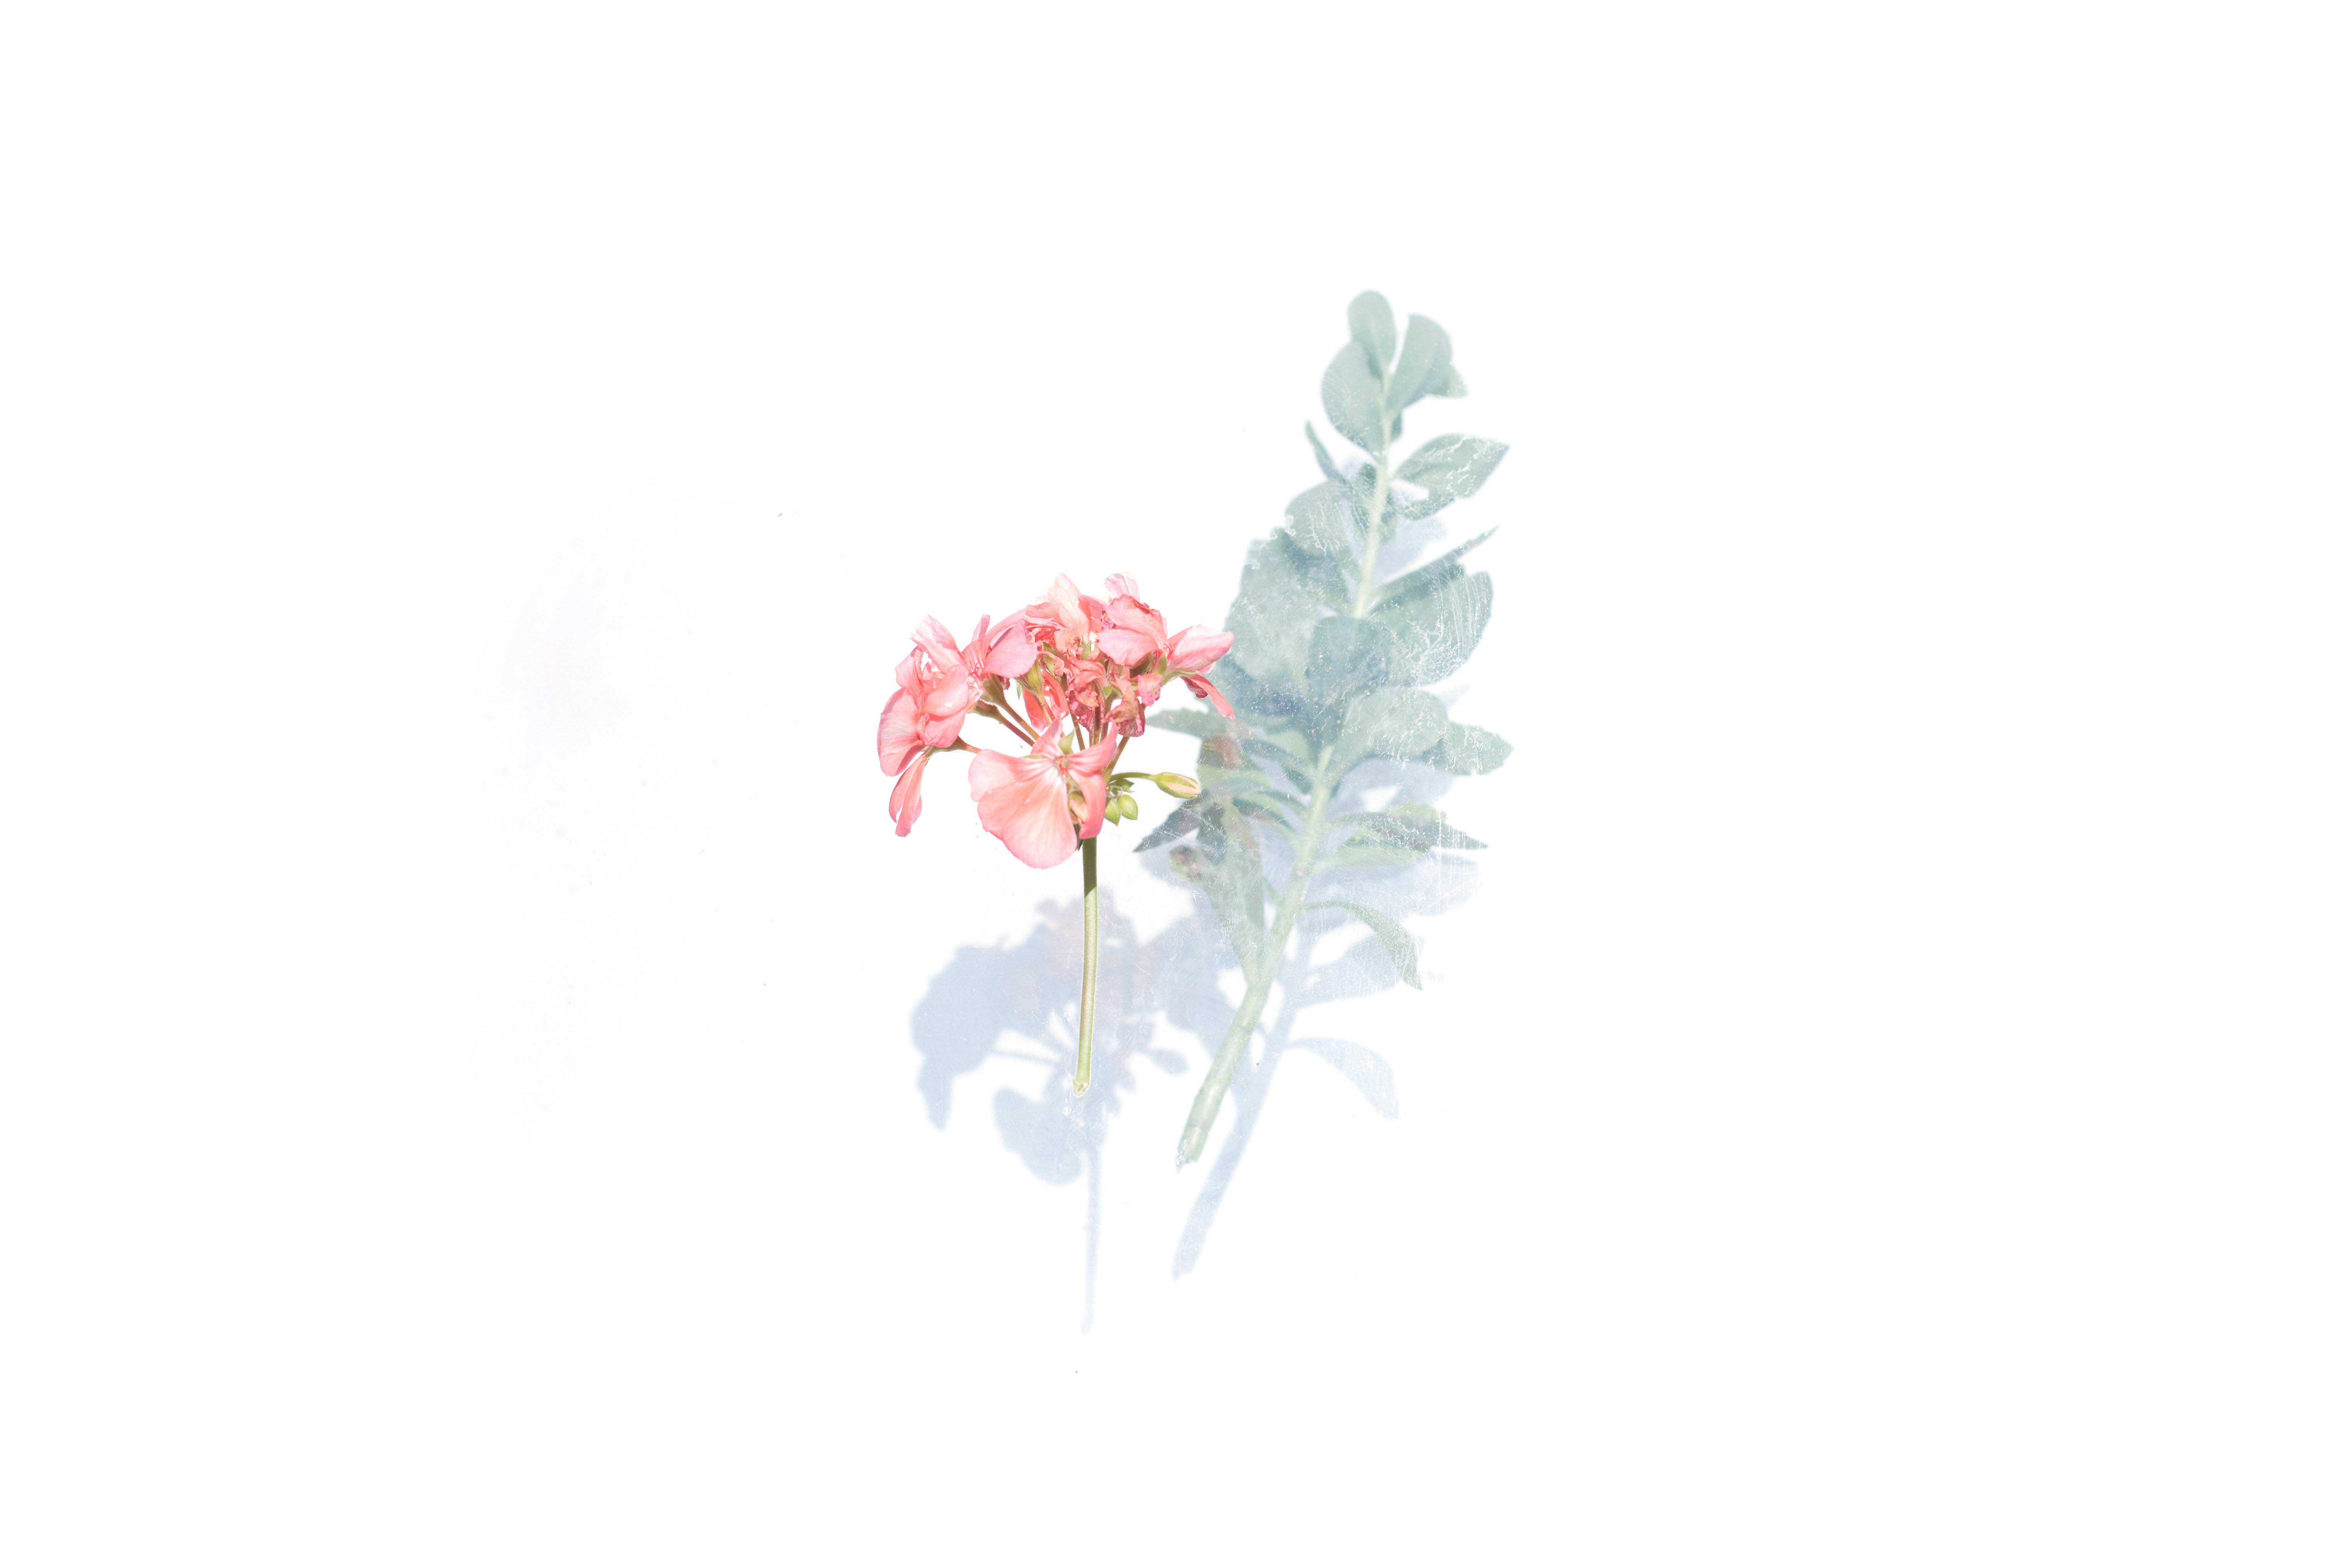 6016x4016 neutral, leaf, pink, floral, begonium, simple, background, flower, faded, bud, glass, Free image, stem, white, nature Gallery HD Wallpaper